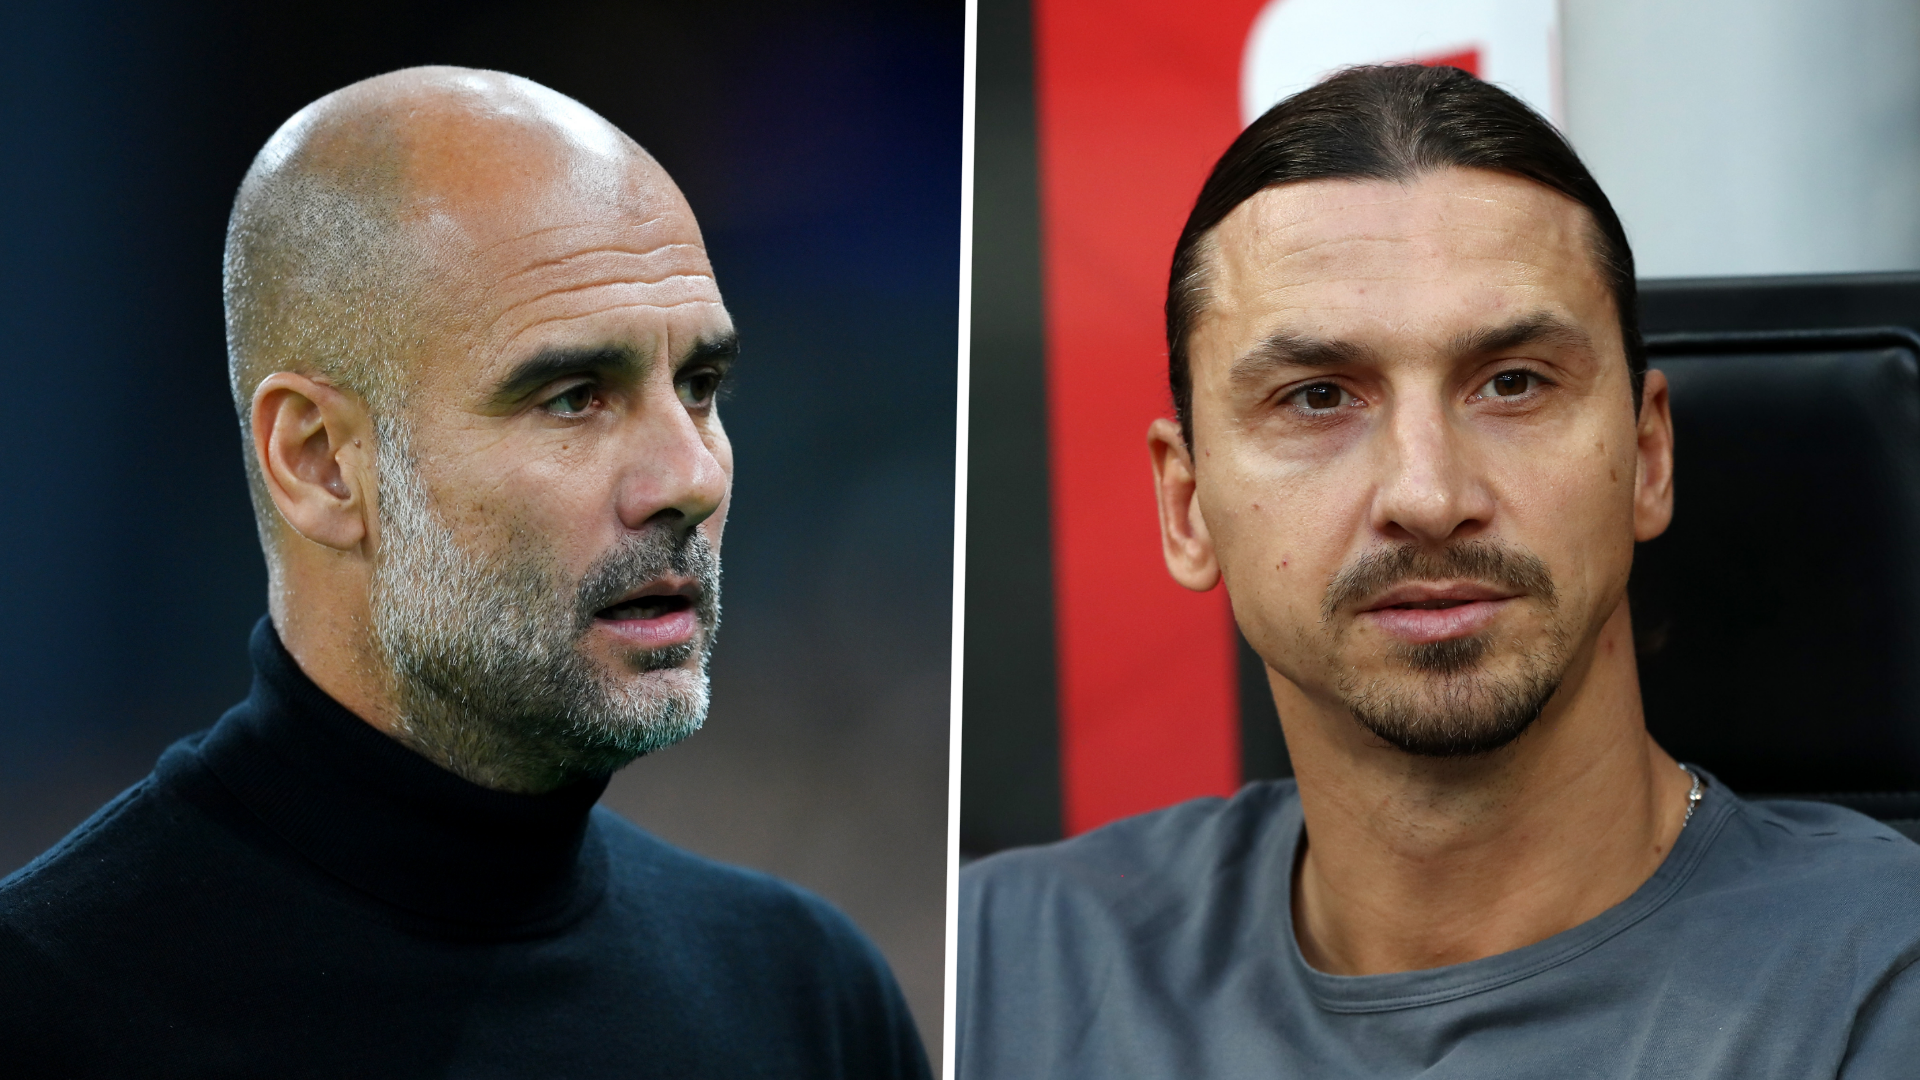 ‘Maybe he can write another book’ – Guardiola sarcastically fires back at Ibrahimovic following Haaland criticism